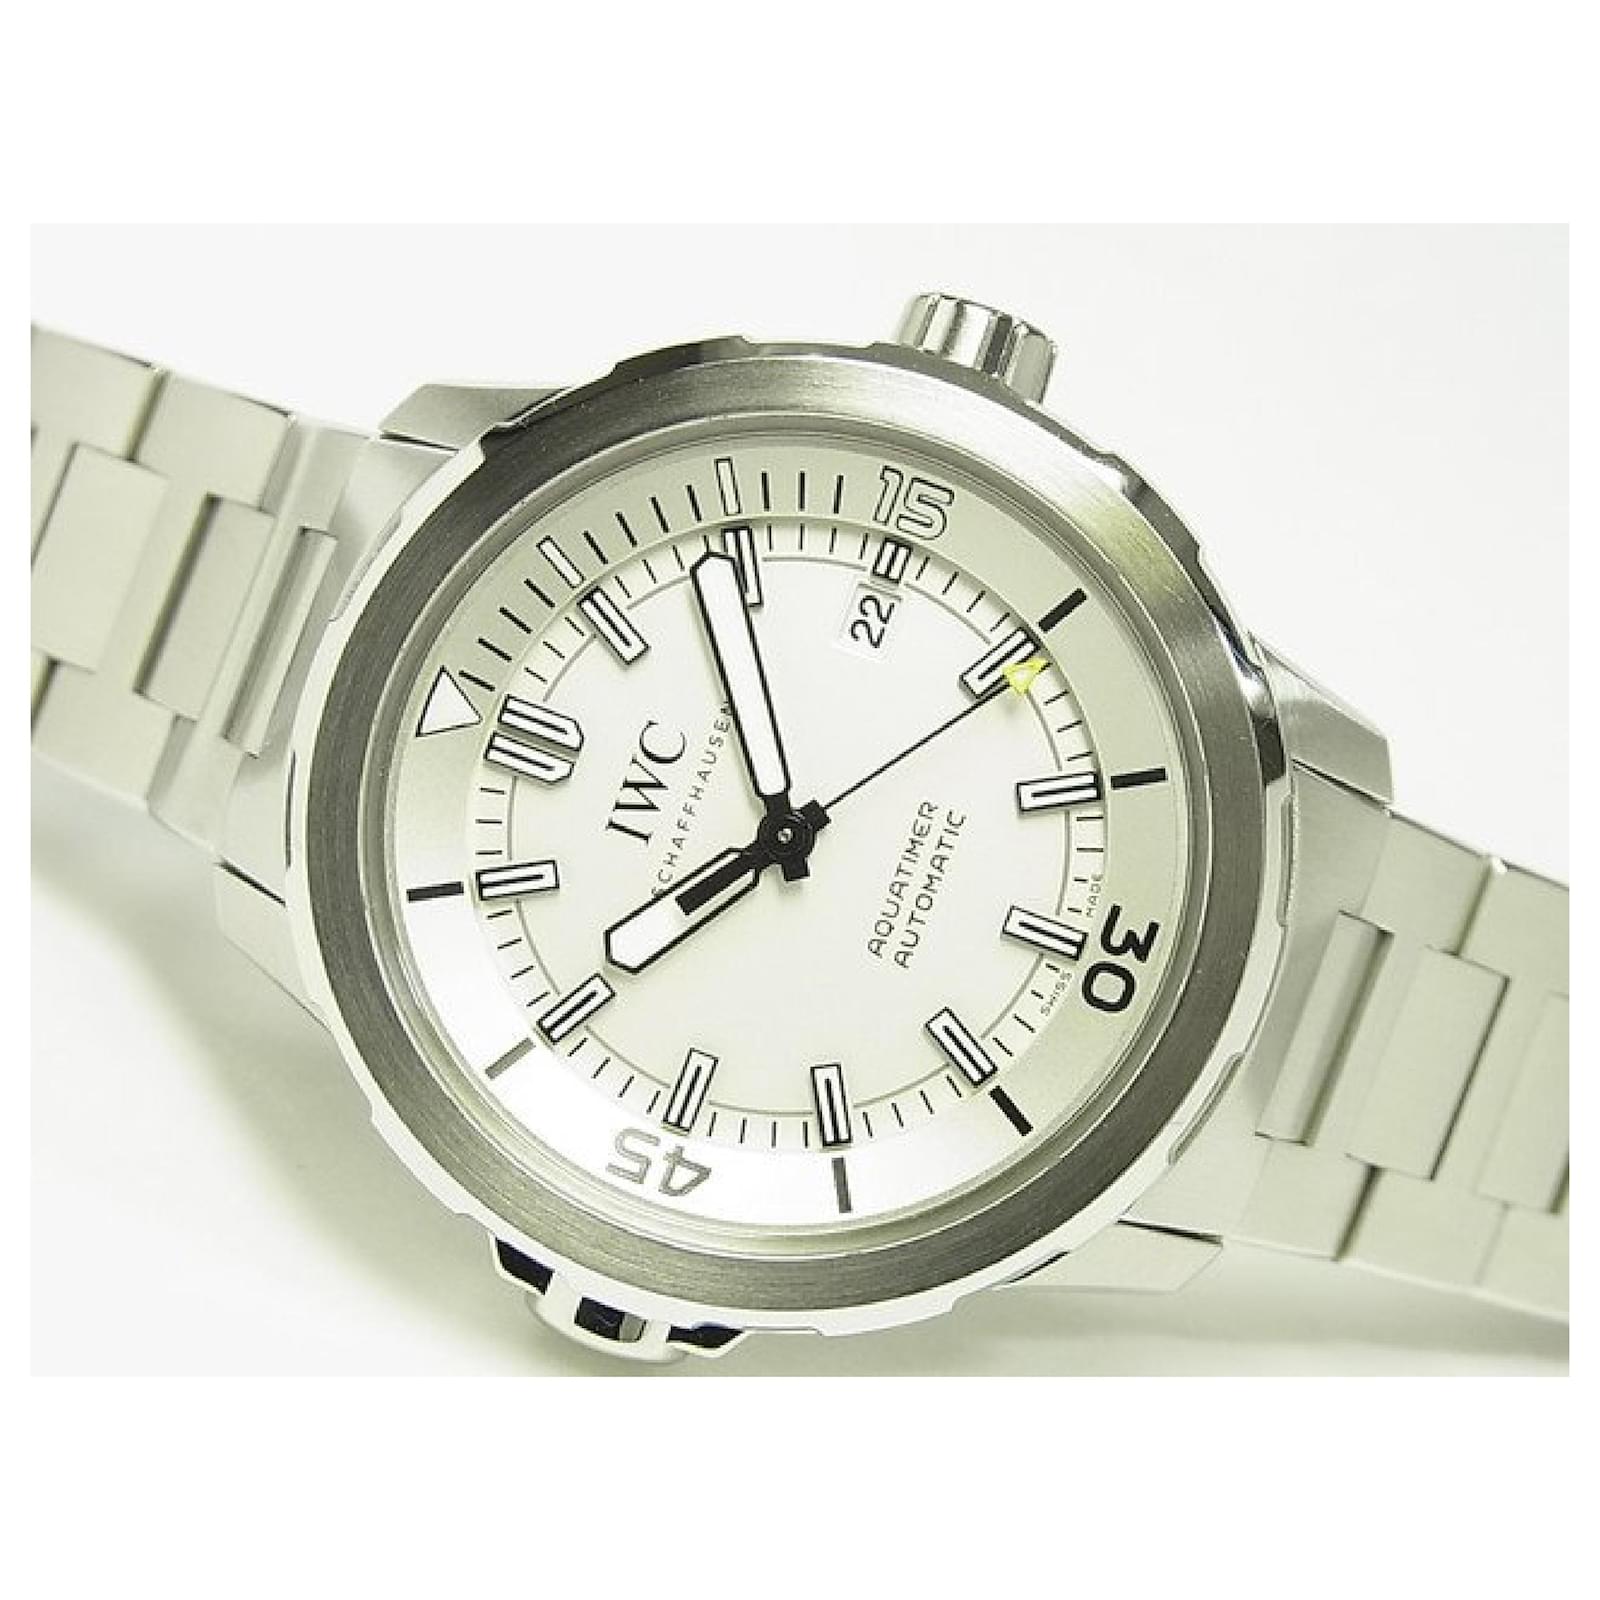 IWC Aquatimer Stahl Automatik Armband Kautschuk 42mm Ref.IW328... for  Rs.533,655 for sale from a Trusted Seller on Chrono24